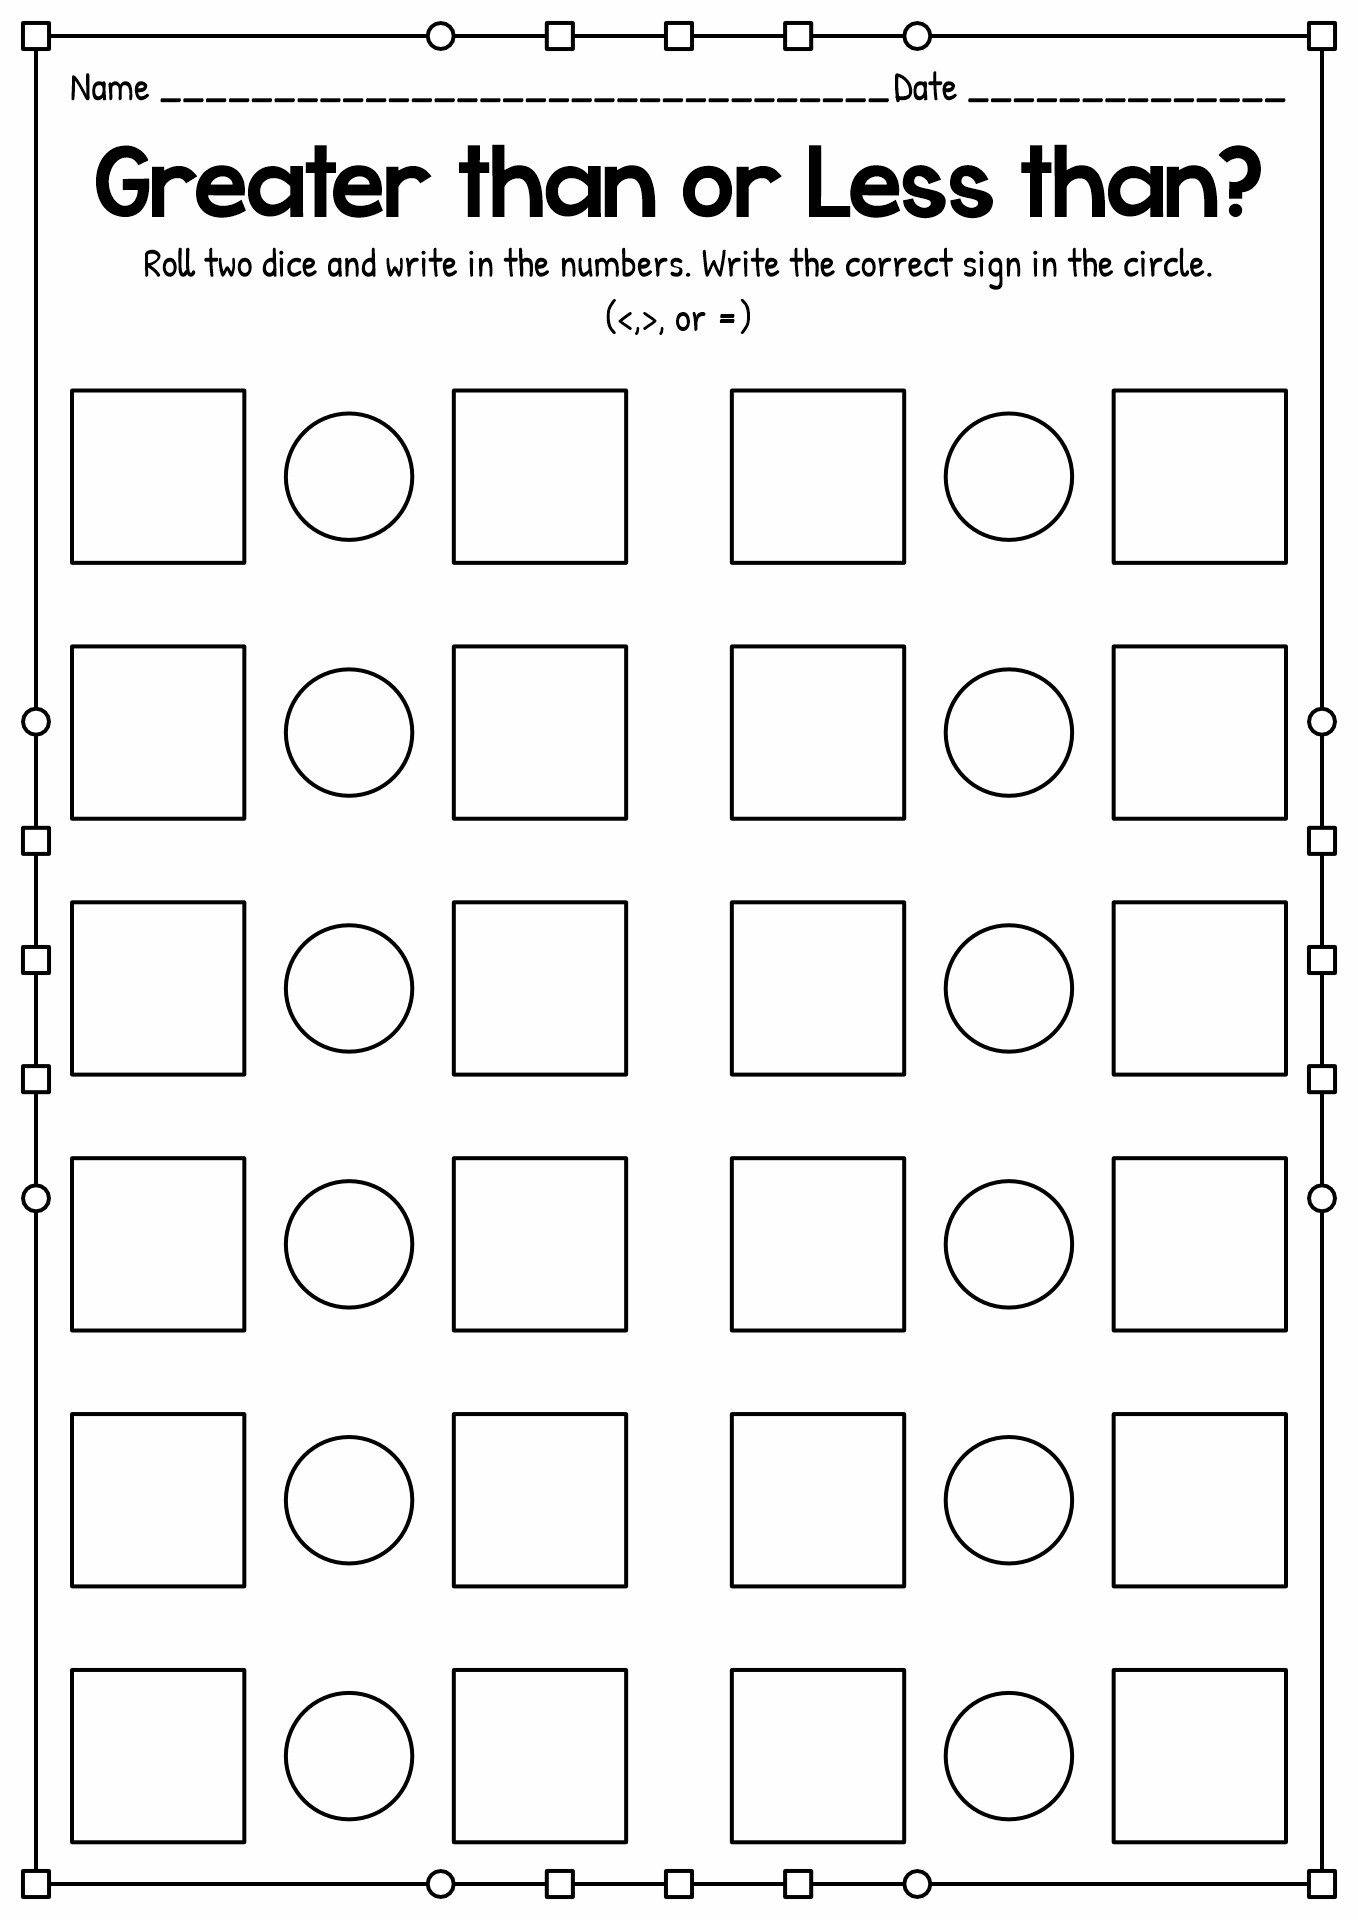 Greater than Less than Dice Game Printable